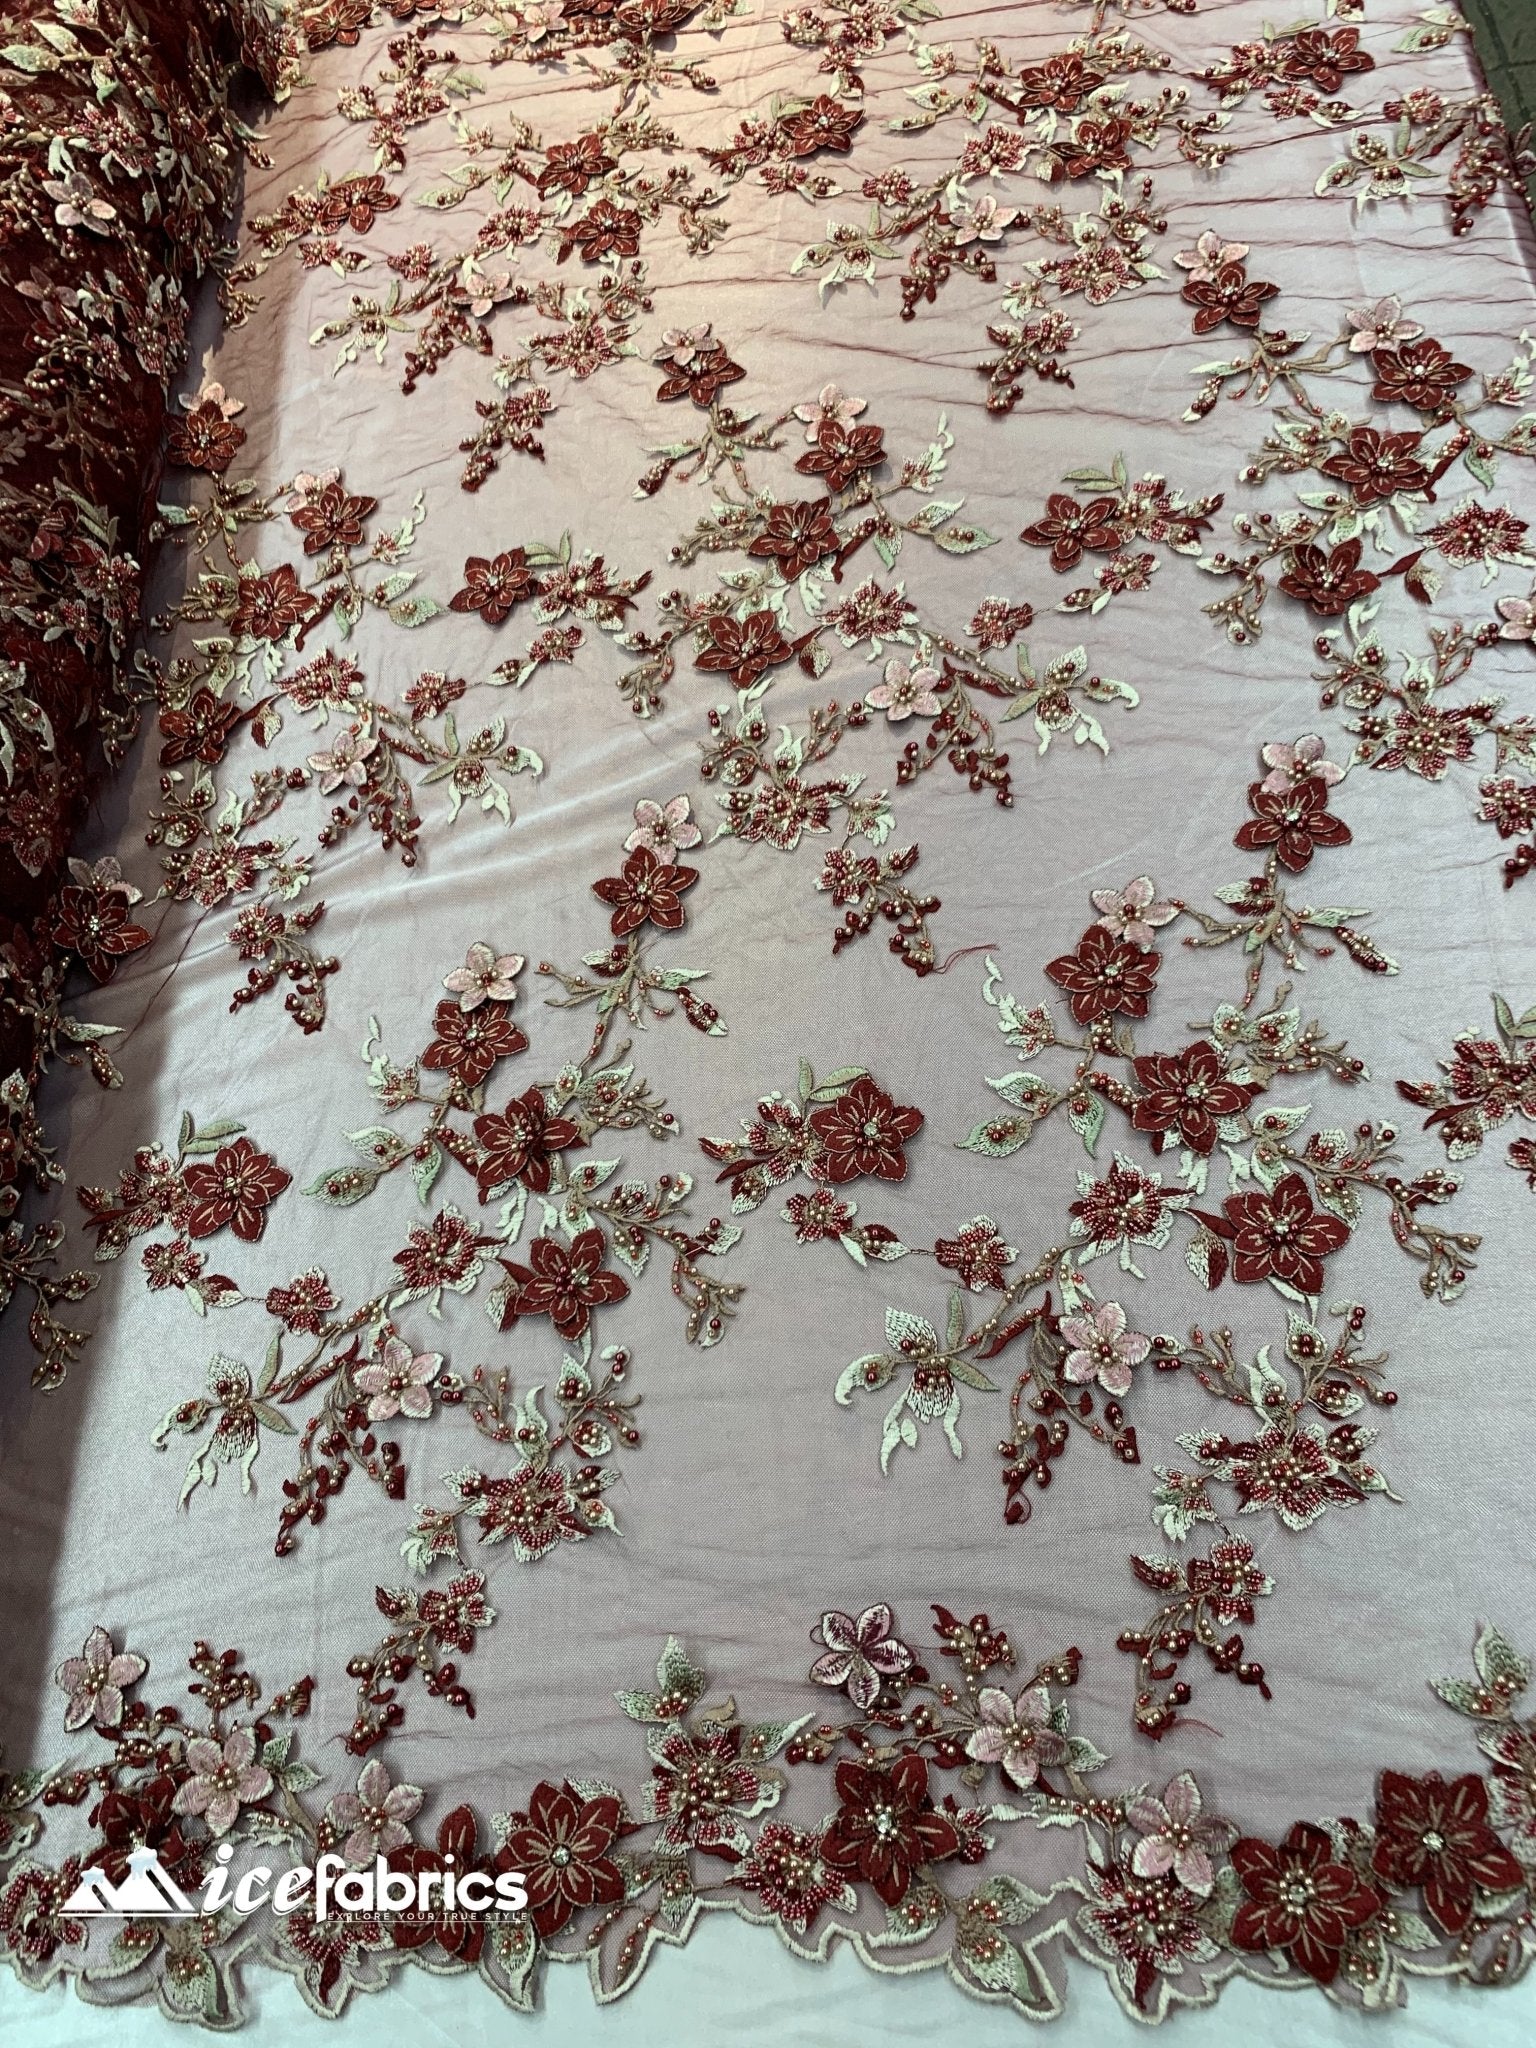 Flowers Embroidered Beaded Fabric/ Mesh Lace Fabric/ Bridal Fabric/ICE FABRICSICE FABRICSBurgundyFlowers Embroidered Beaded Fabric/ Mesh Lace Fabric/ Bridal Fabric/ ICE FABRICS Burgundy